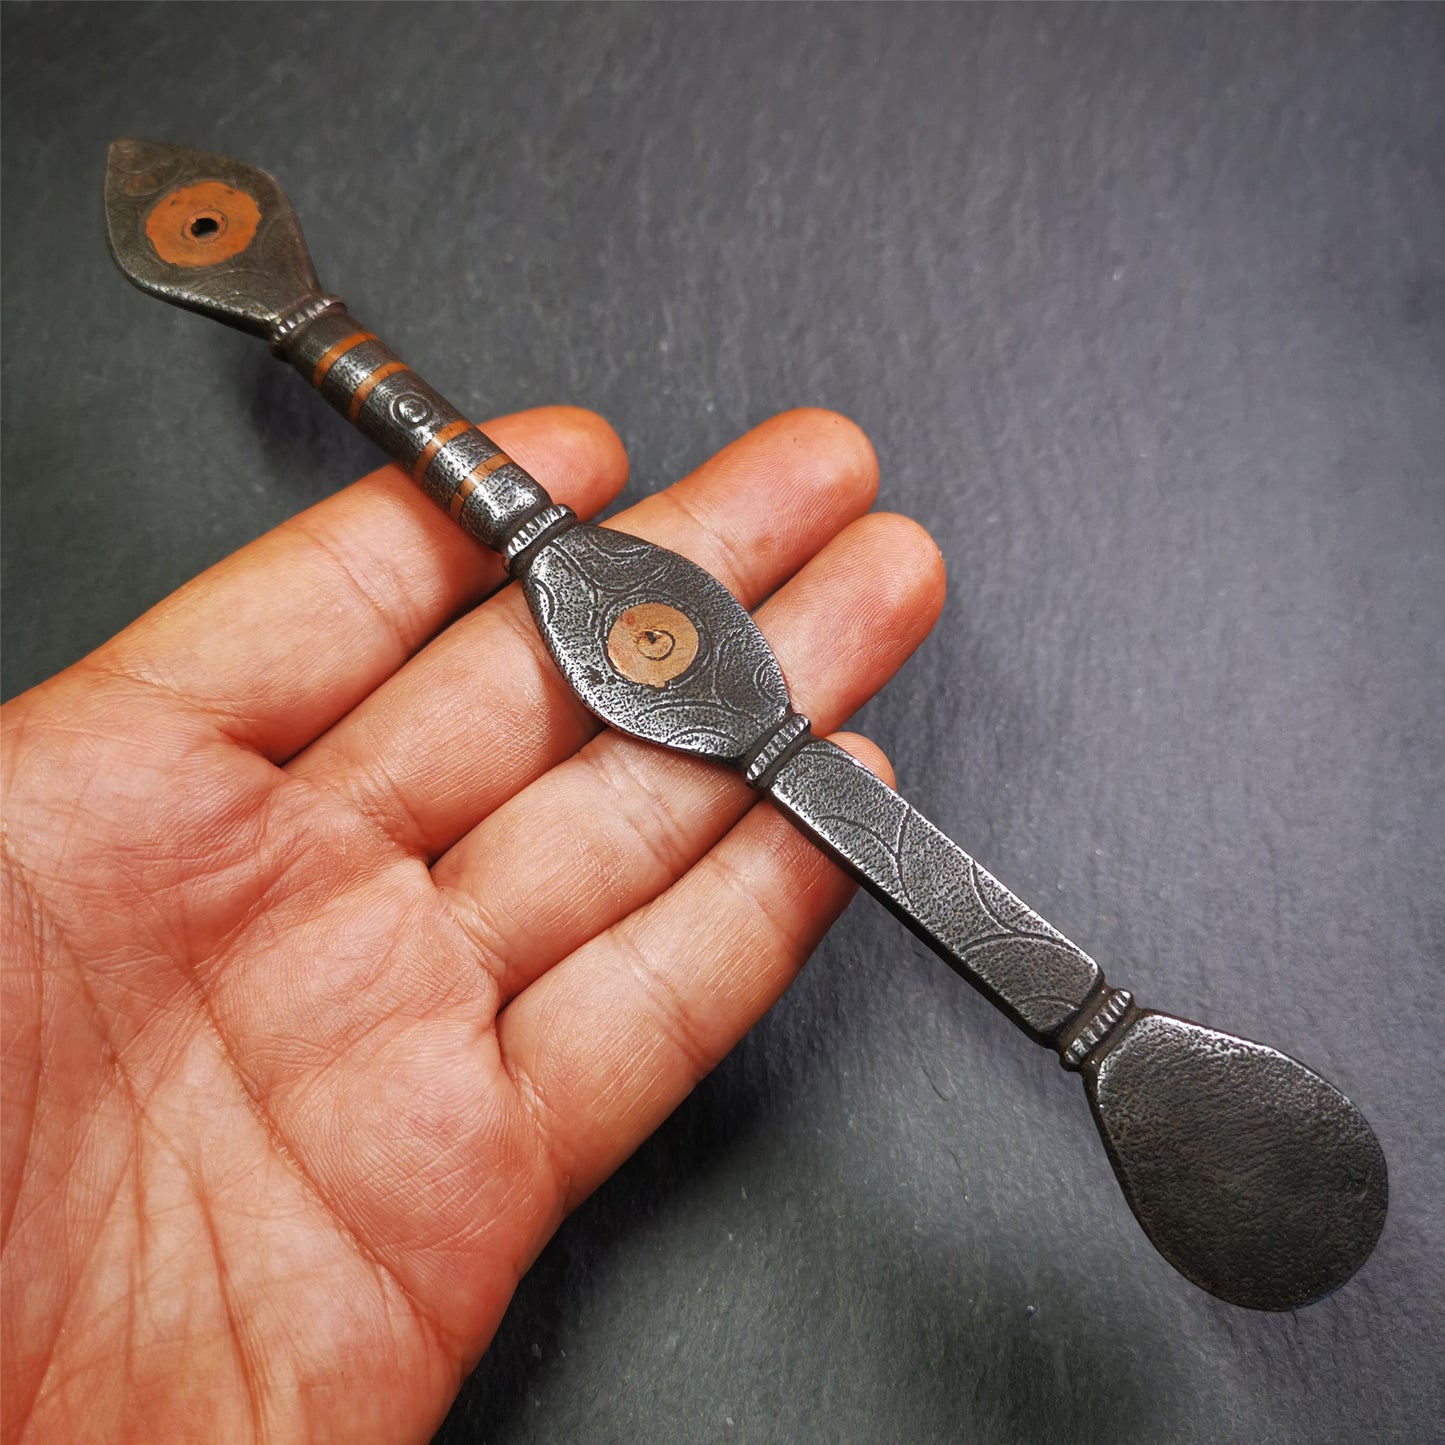 This spoon is handmade by Tibetan craftsmen from Tibet. It is entirely hand-carved with cold iron and copper,lenght about 7.5 inches. You can see teh intricate engraved detail along the handle, neck and bowl,very beautiful.